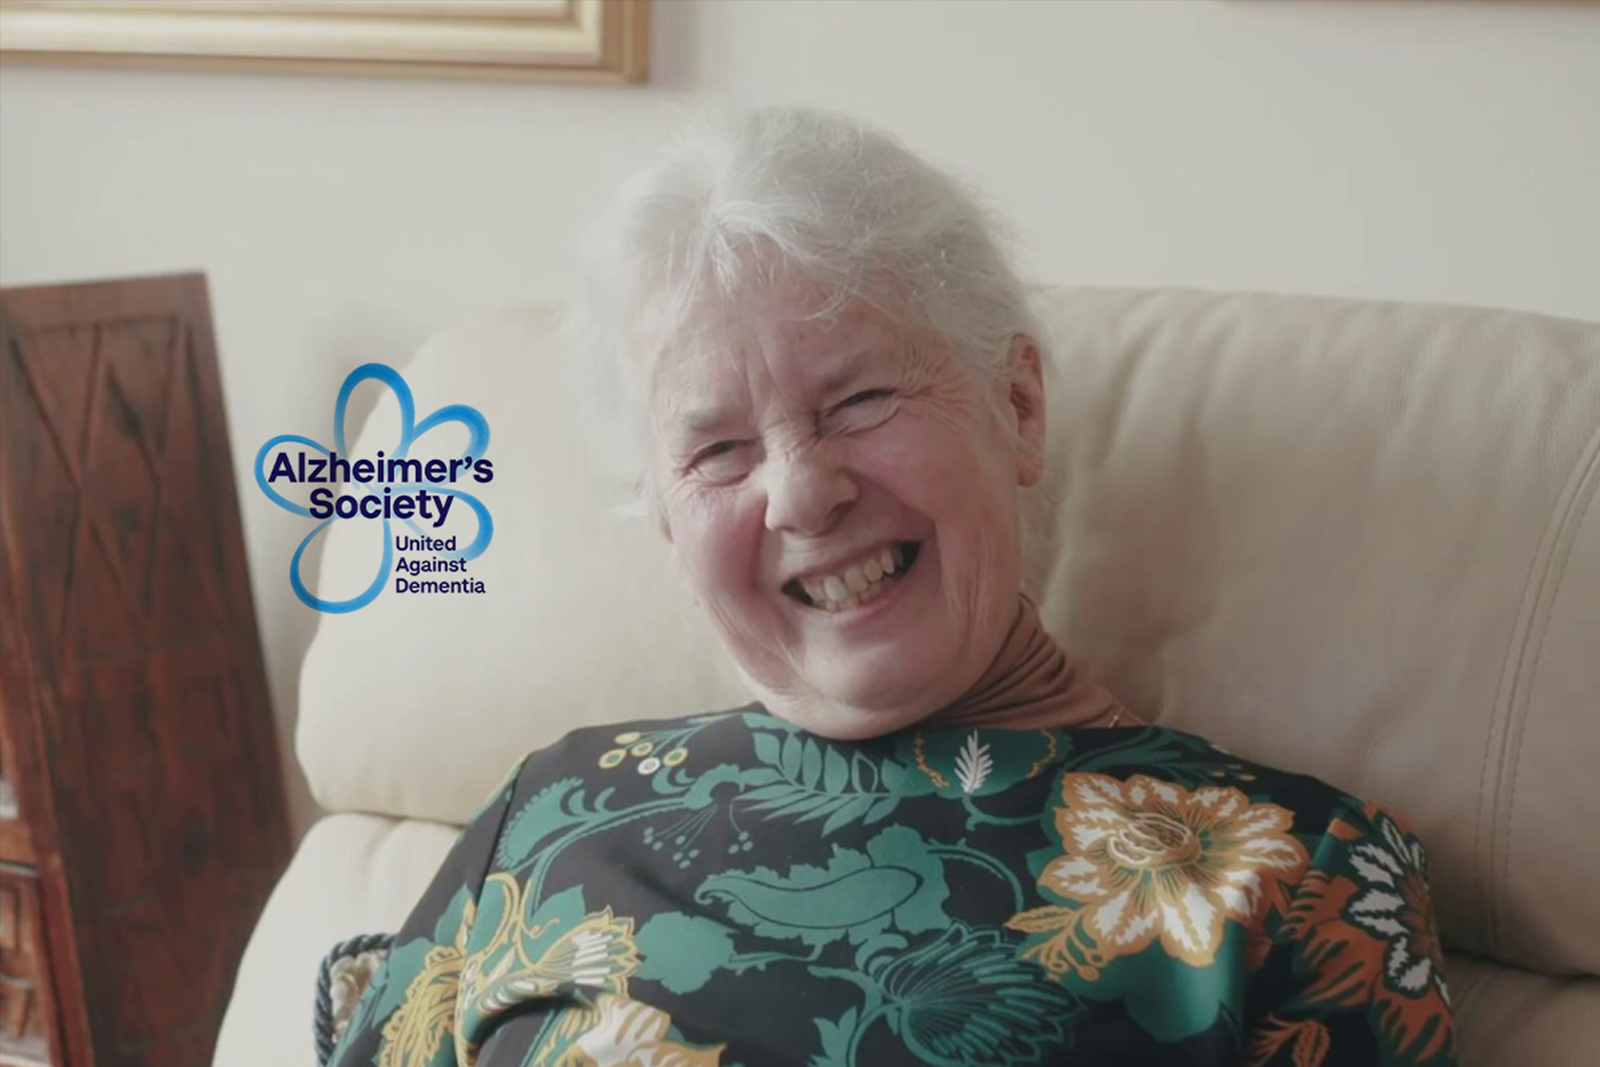 Jennifer Bute – Dementia patient using My Carer by Alzheimer’s Society